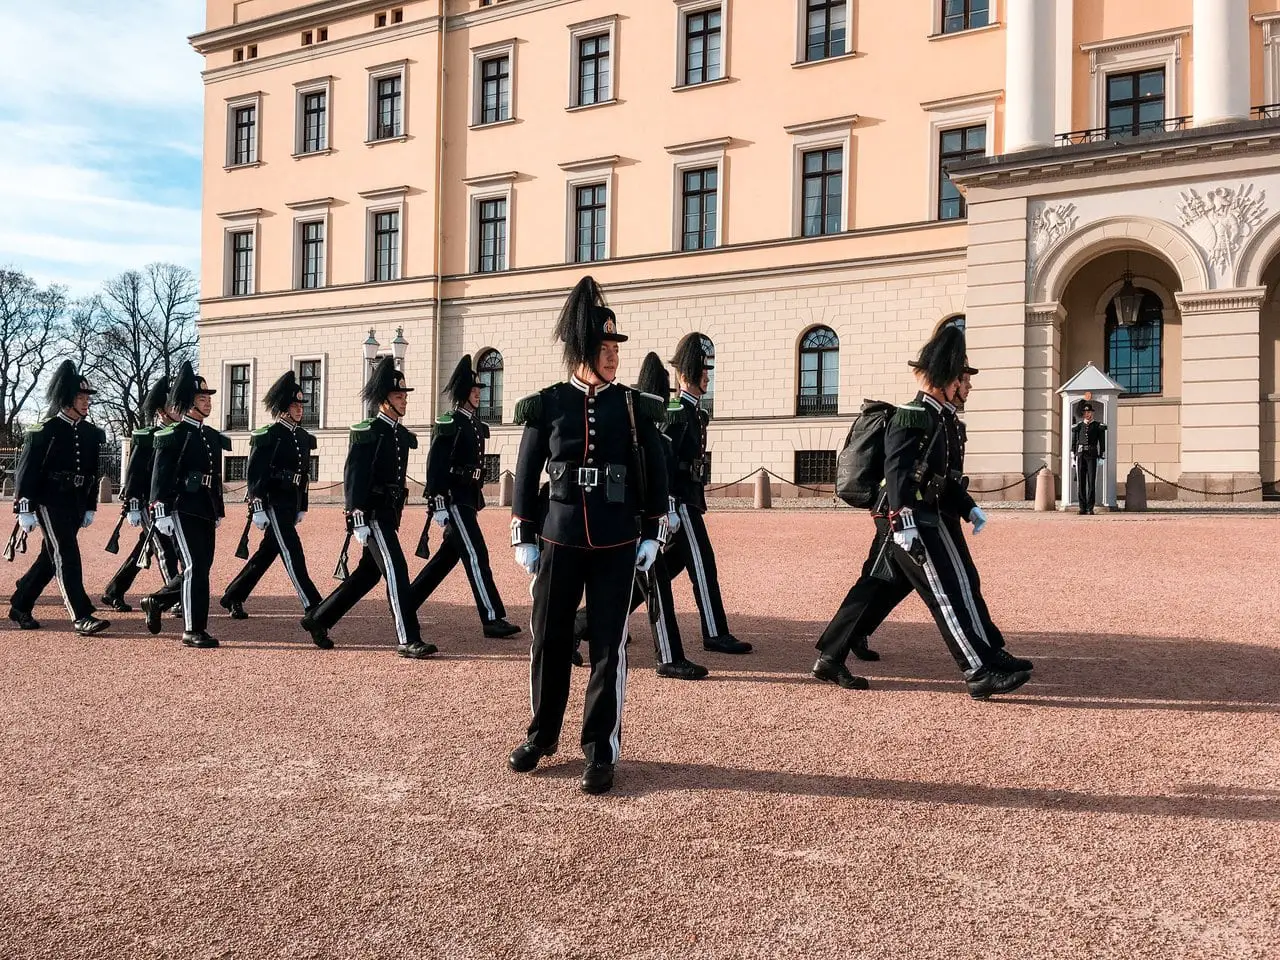 Changing of the guards ceremony at Oslo Royal Palace, Norway, featuring numerous guards in black uniforms marching in front of the Oslo Royal Palace